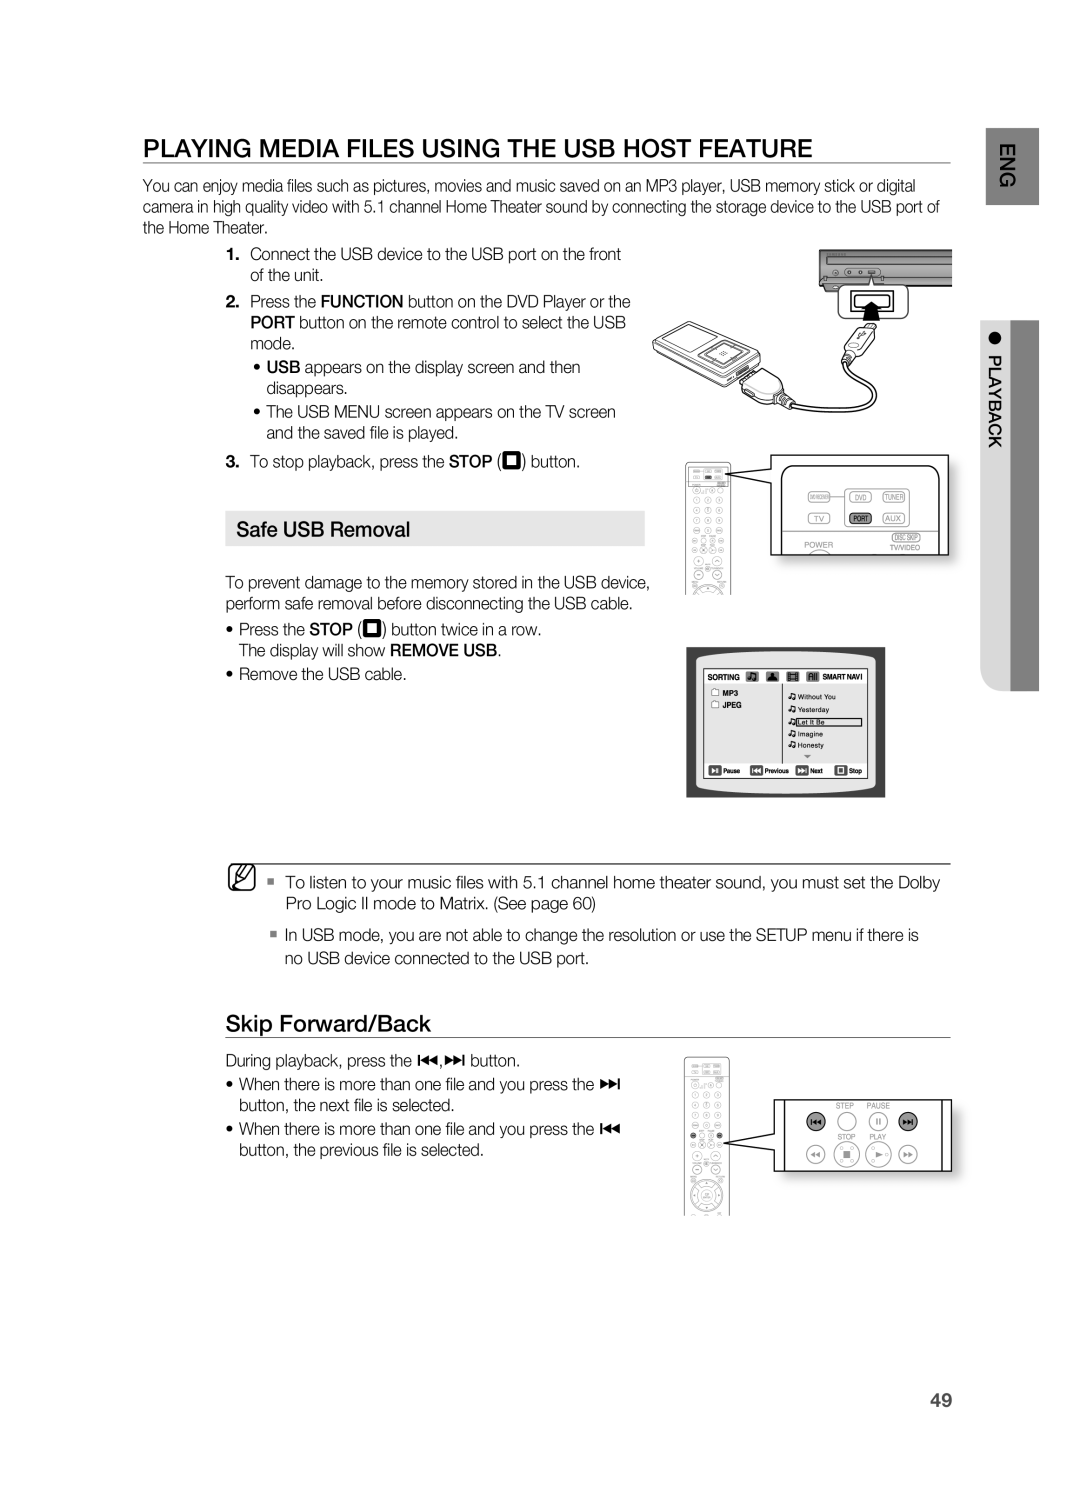 Samsung HT-TWZ415 user manual PLAYINg MEDIA FILES USINg THE USB HOST FEATUrE, Safe USB removal 